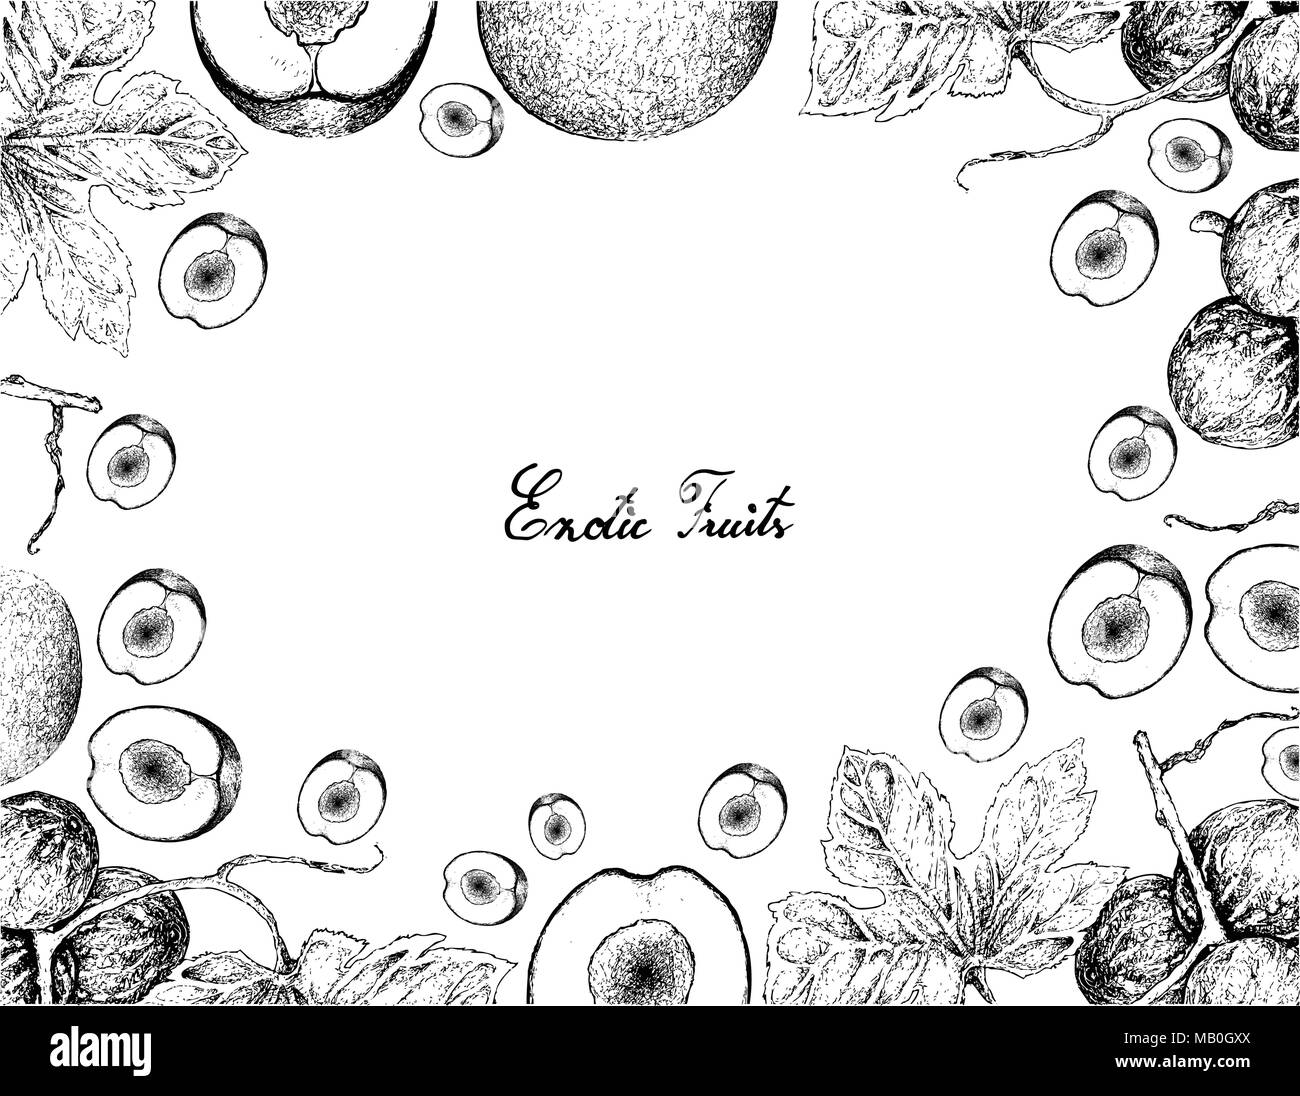 Vegetable and Fruit, Illustration Frame of Hand Drawn Sketch of Native Bryony, Striped Cucumber or Diplocyclos Palmatus and Davidson Plums or Davidson Stock Vector